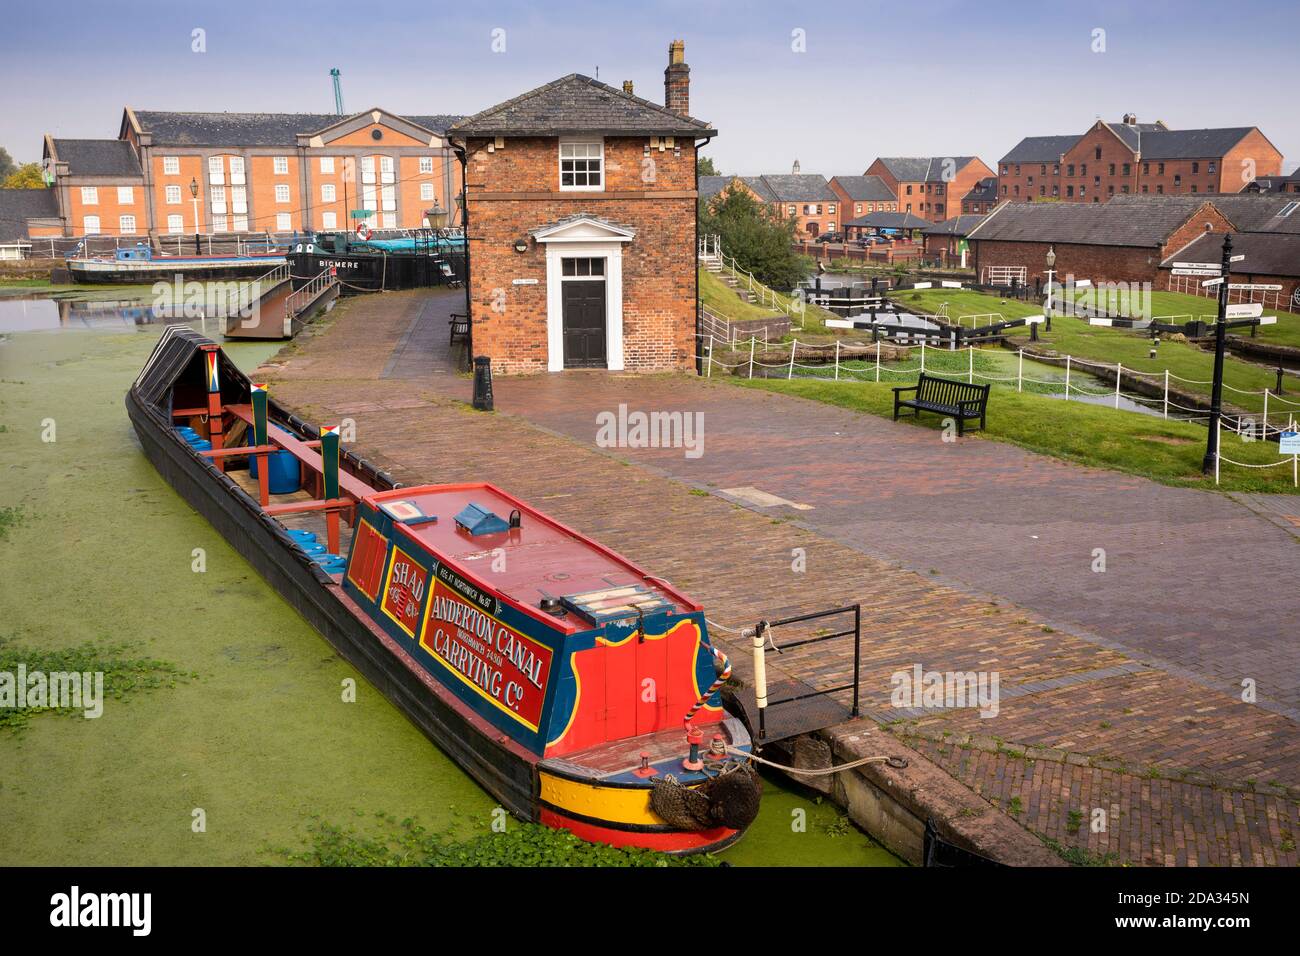 UK, England, Cheshire, Ellesmere Port, National Waterways Museum, barge moored in Pump House basin near Toll House above locks Stock Photo